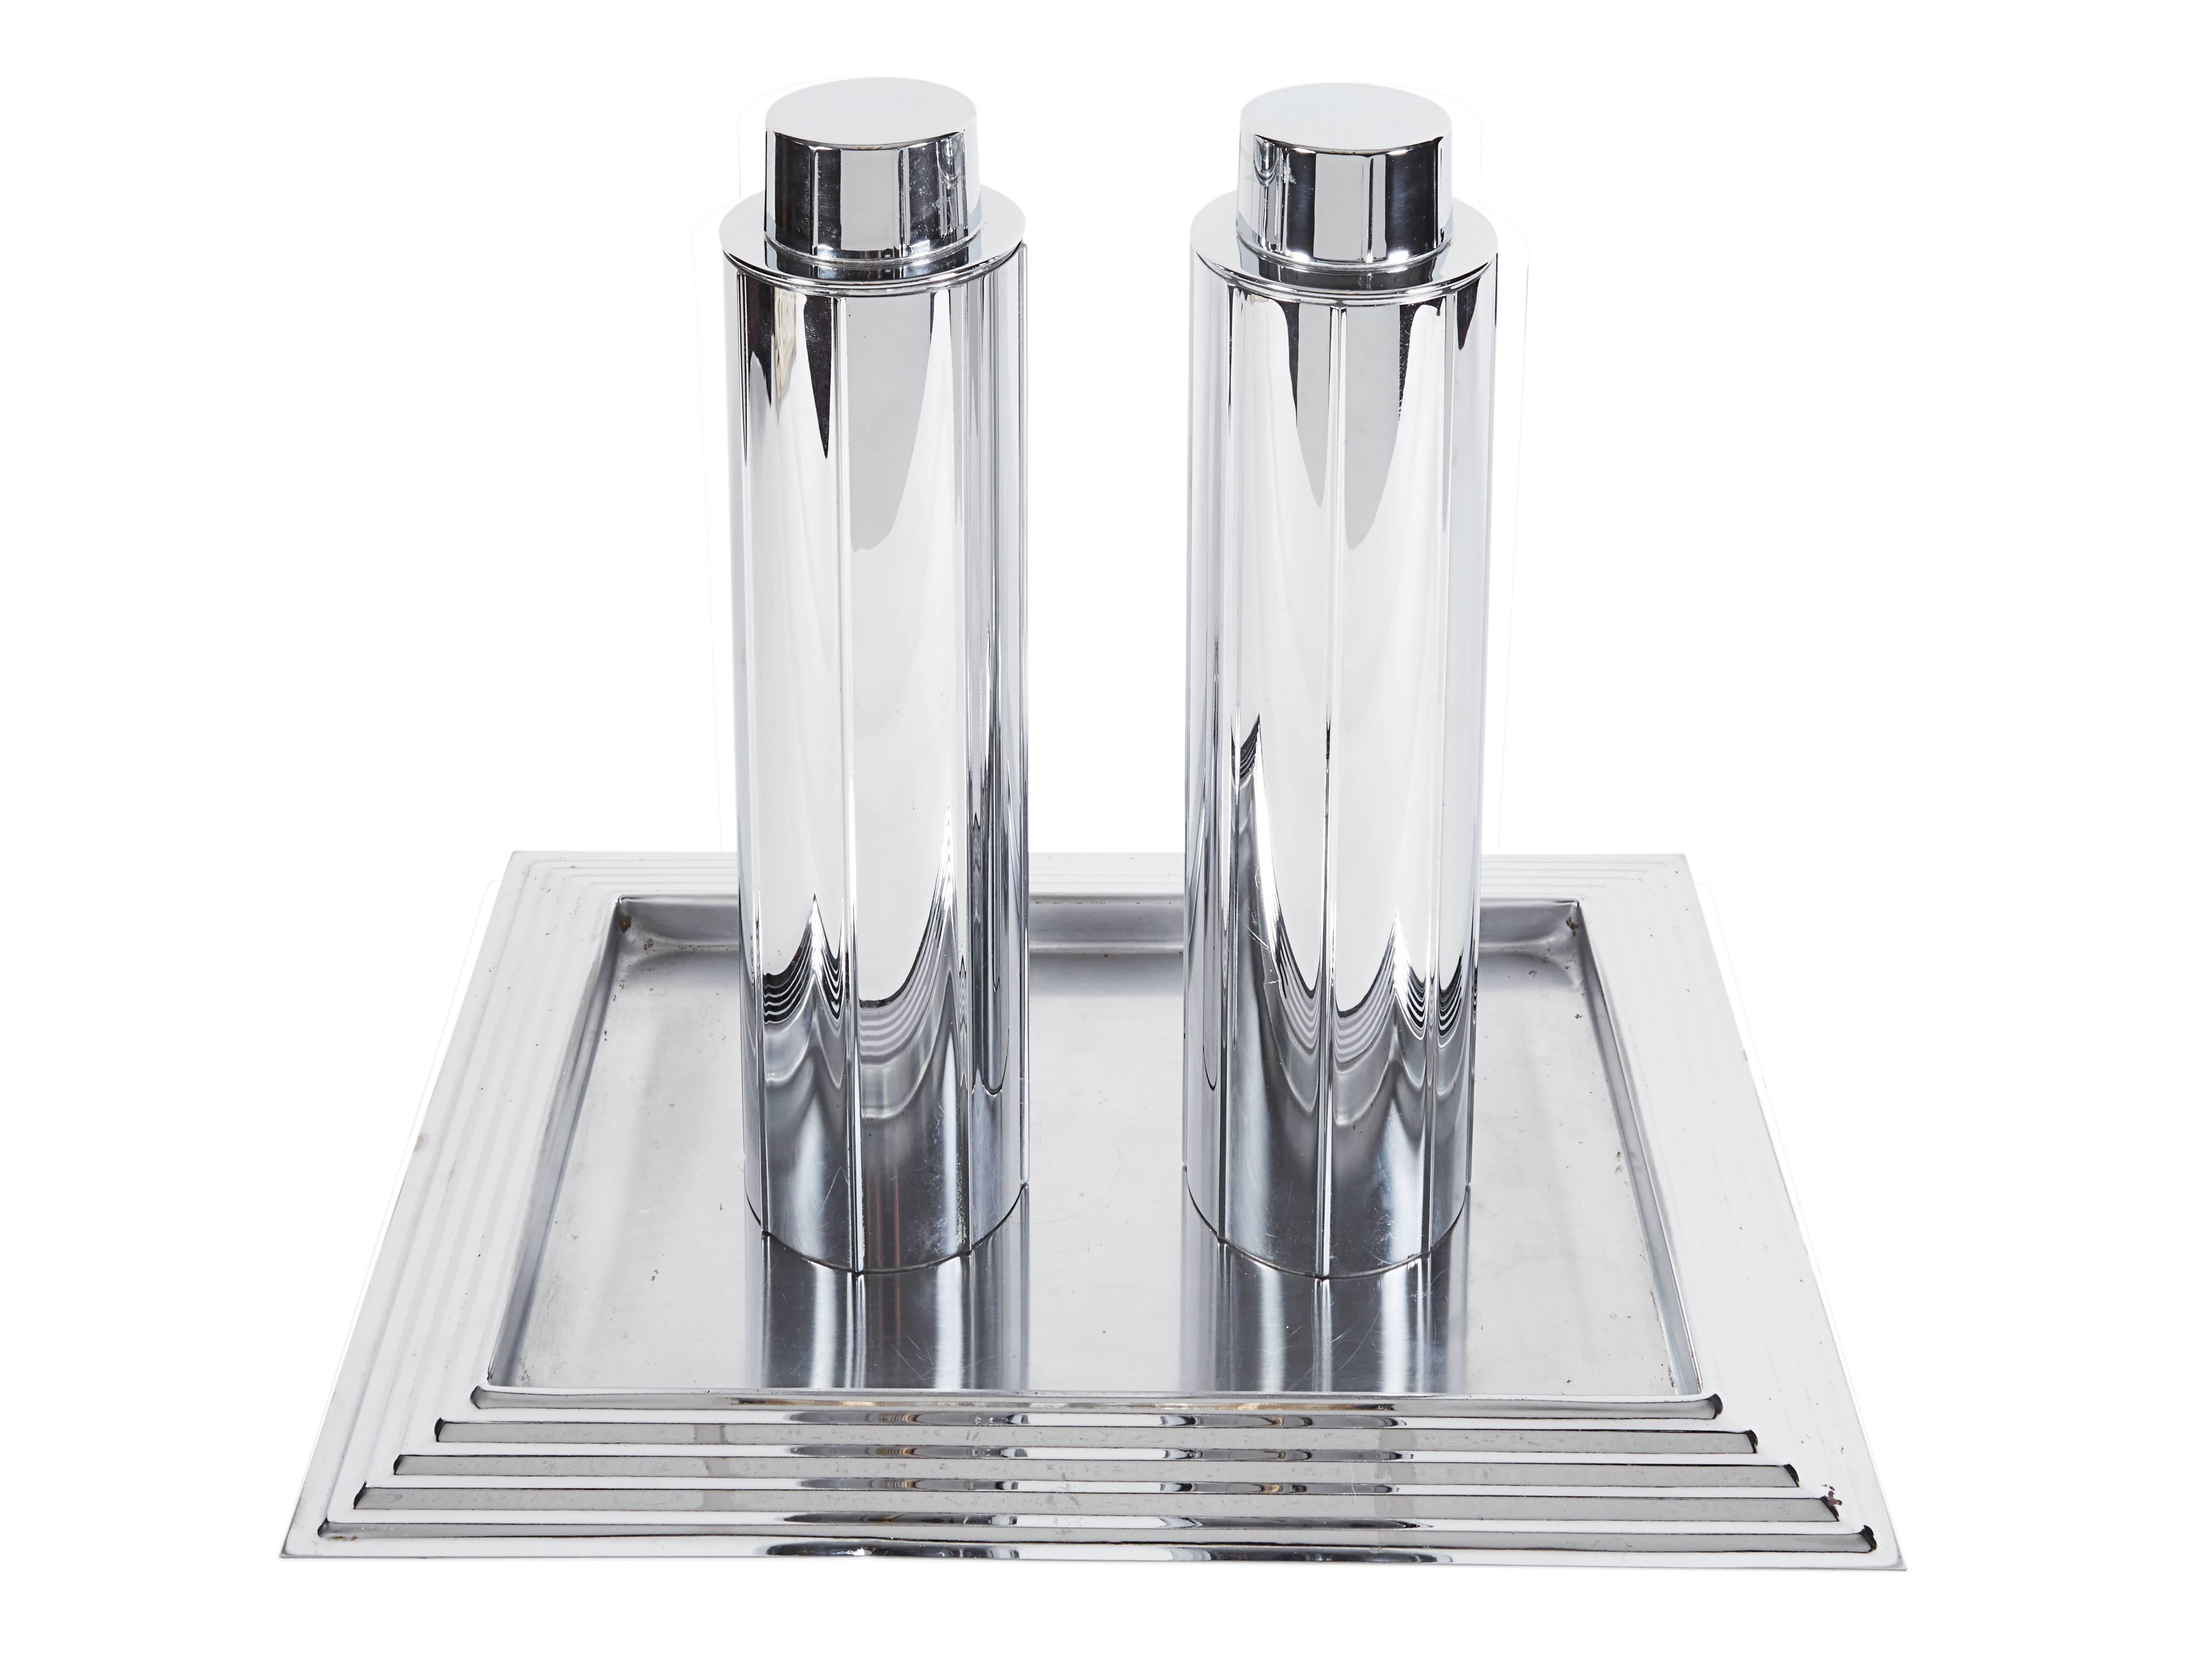 Norman Bel Geddes (1893-1958) for Revere, Manhattan pair of cocktail shakers and tray, Rome, NY, USA.

1930s, chromed steel, stamped marks

Measures: Shakers 3.5